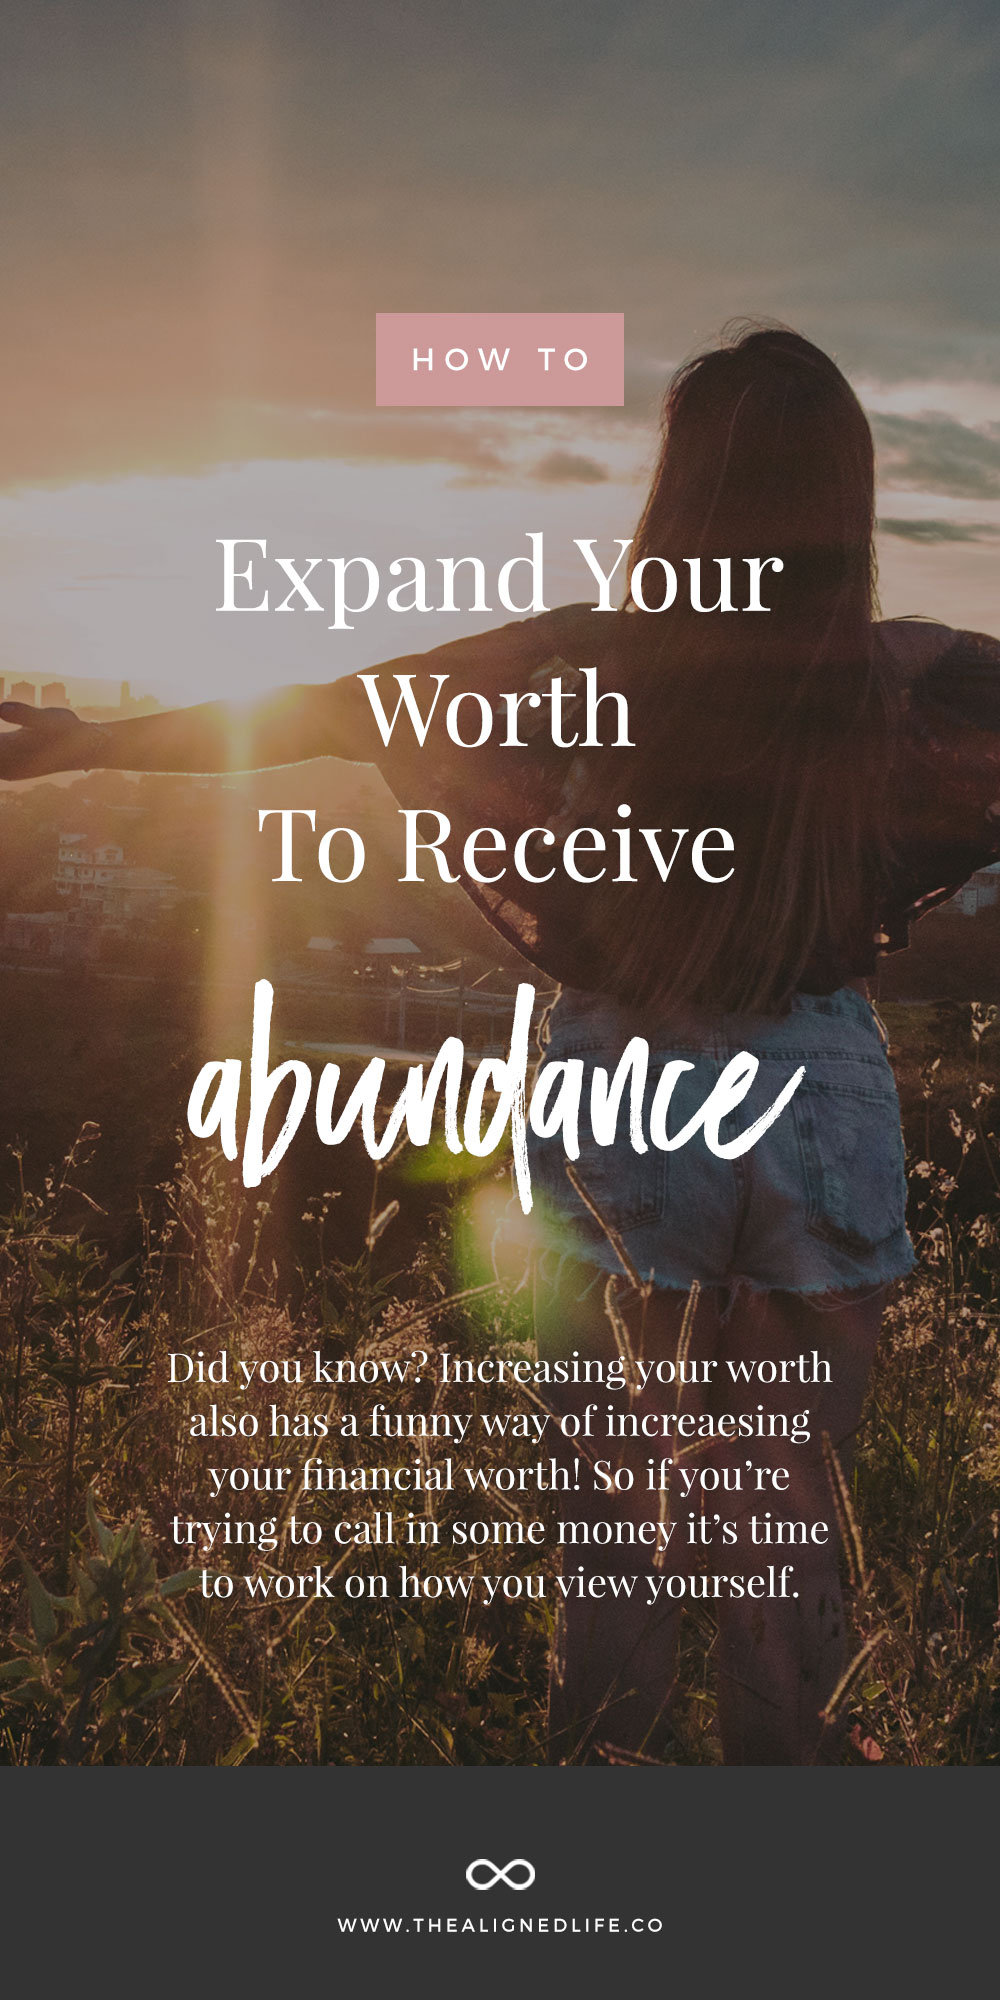 Expand Your Worth To Receive Abundance